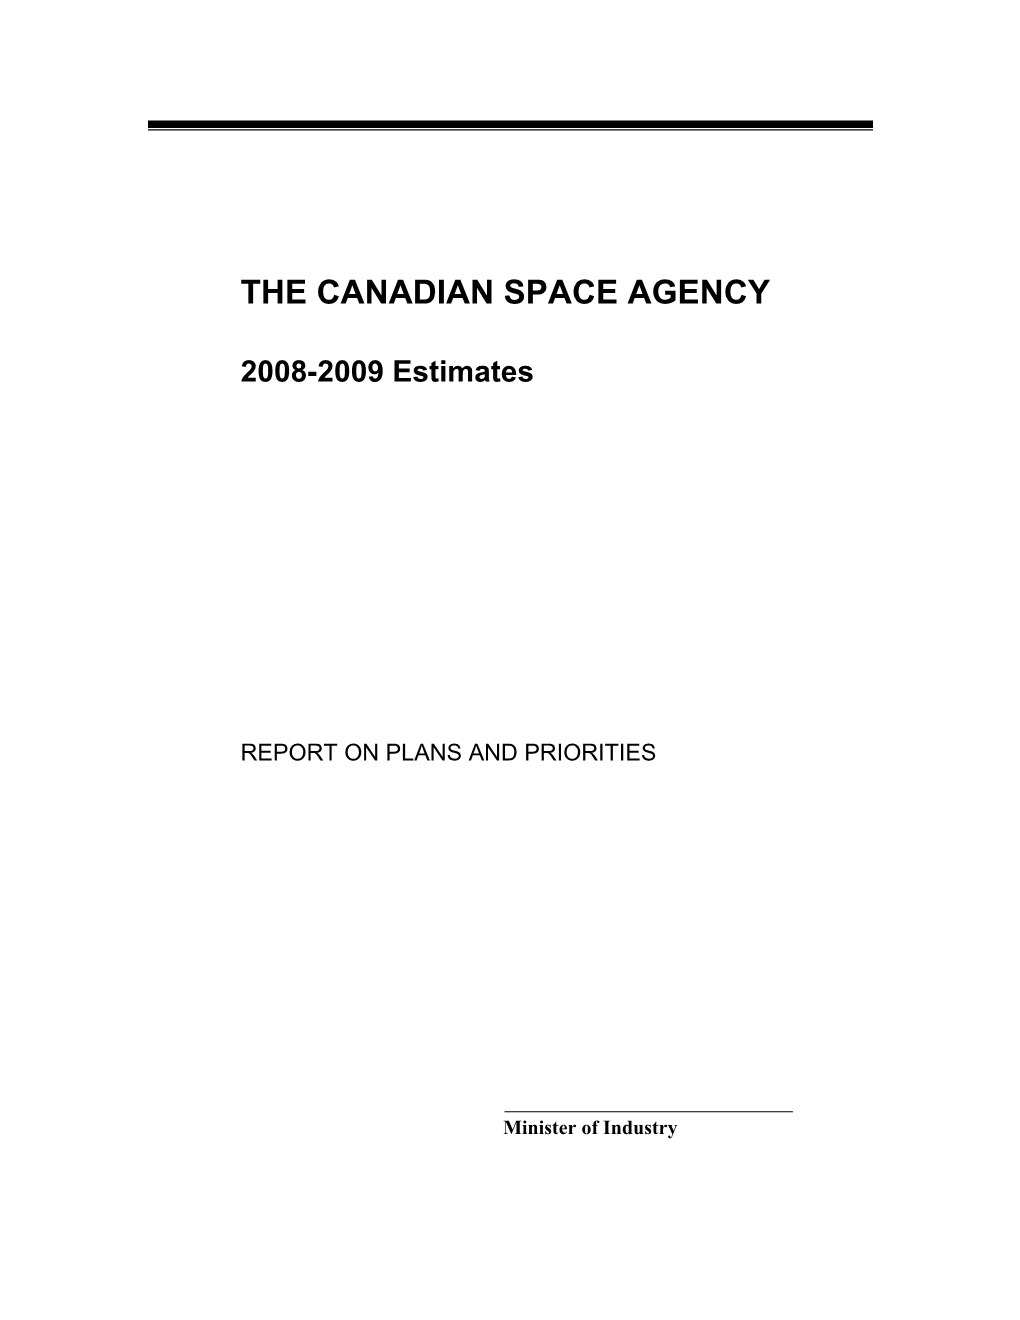 The Canadian Space Agency